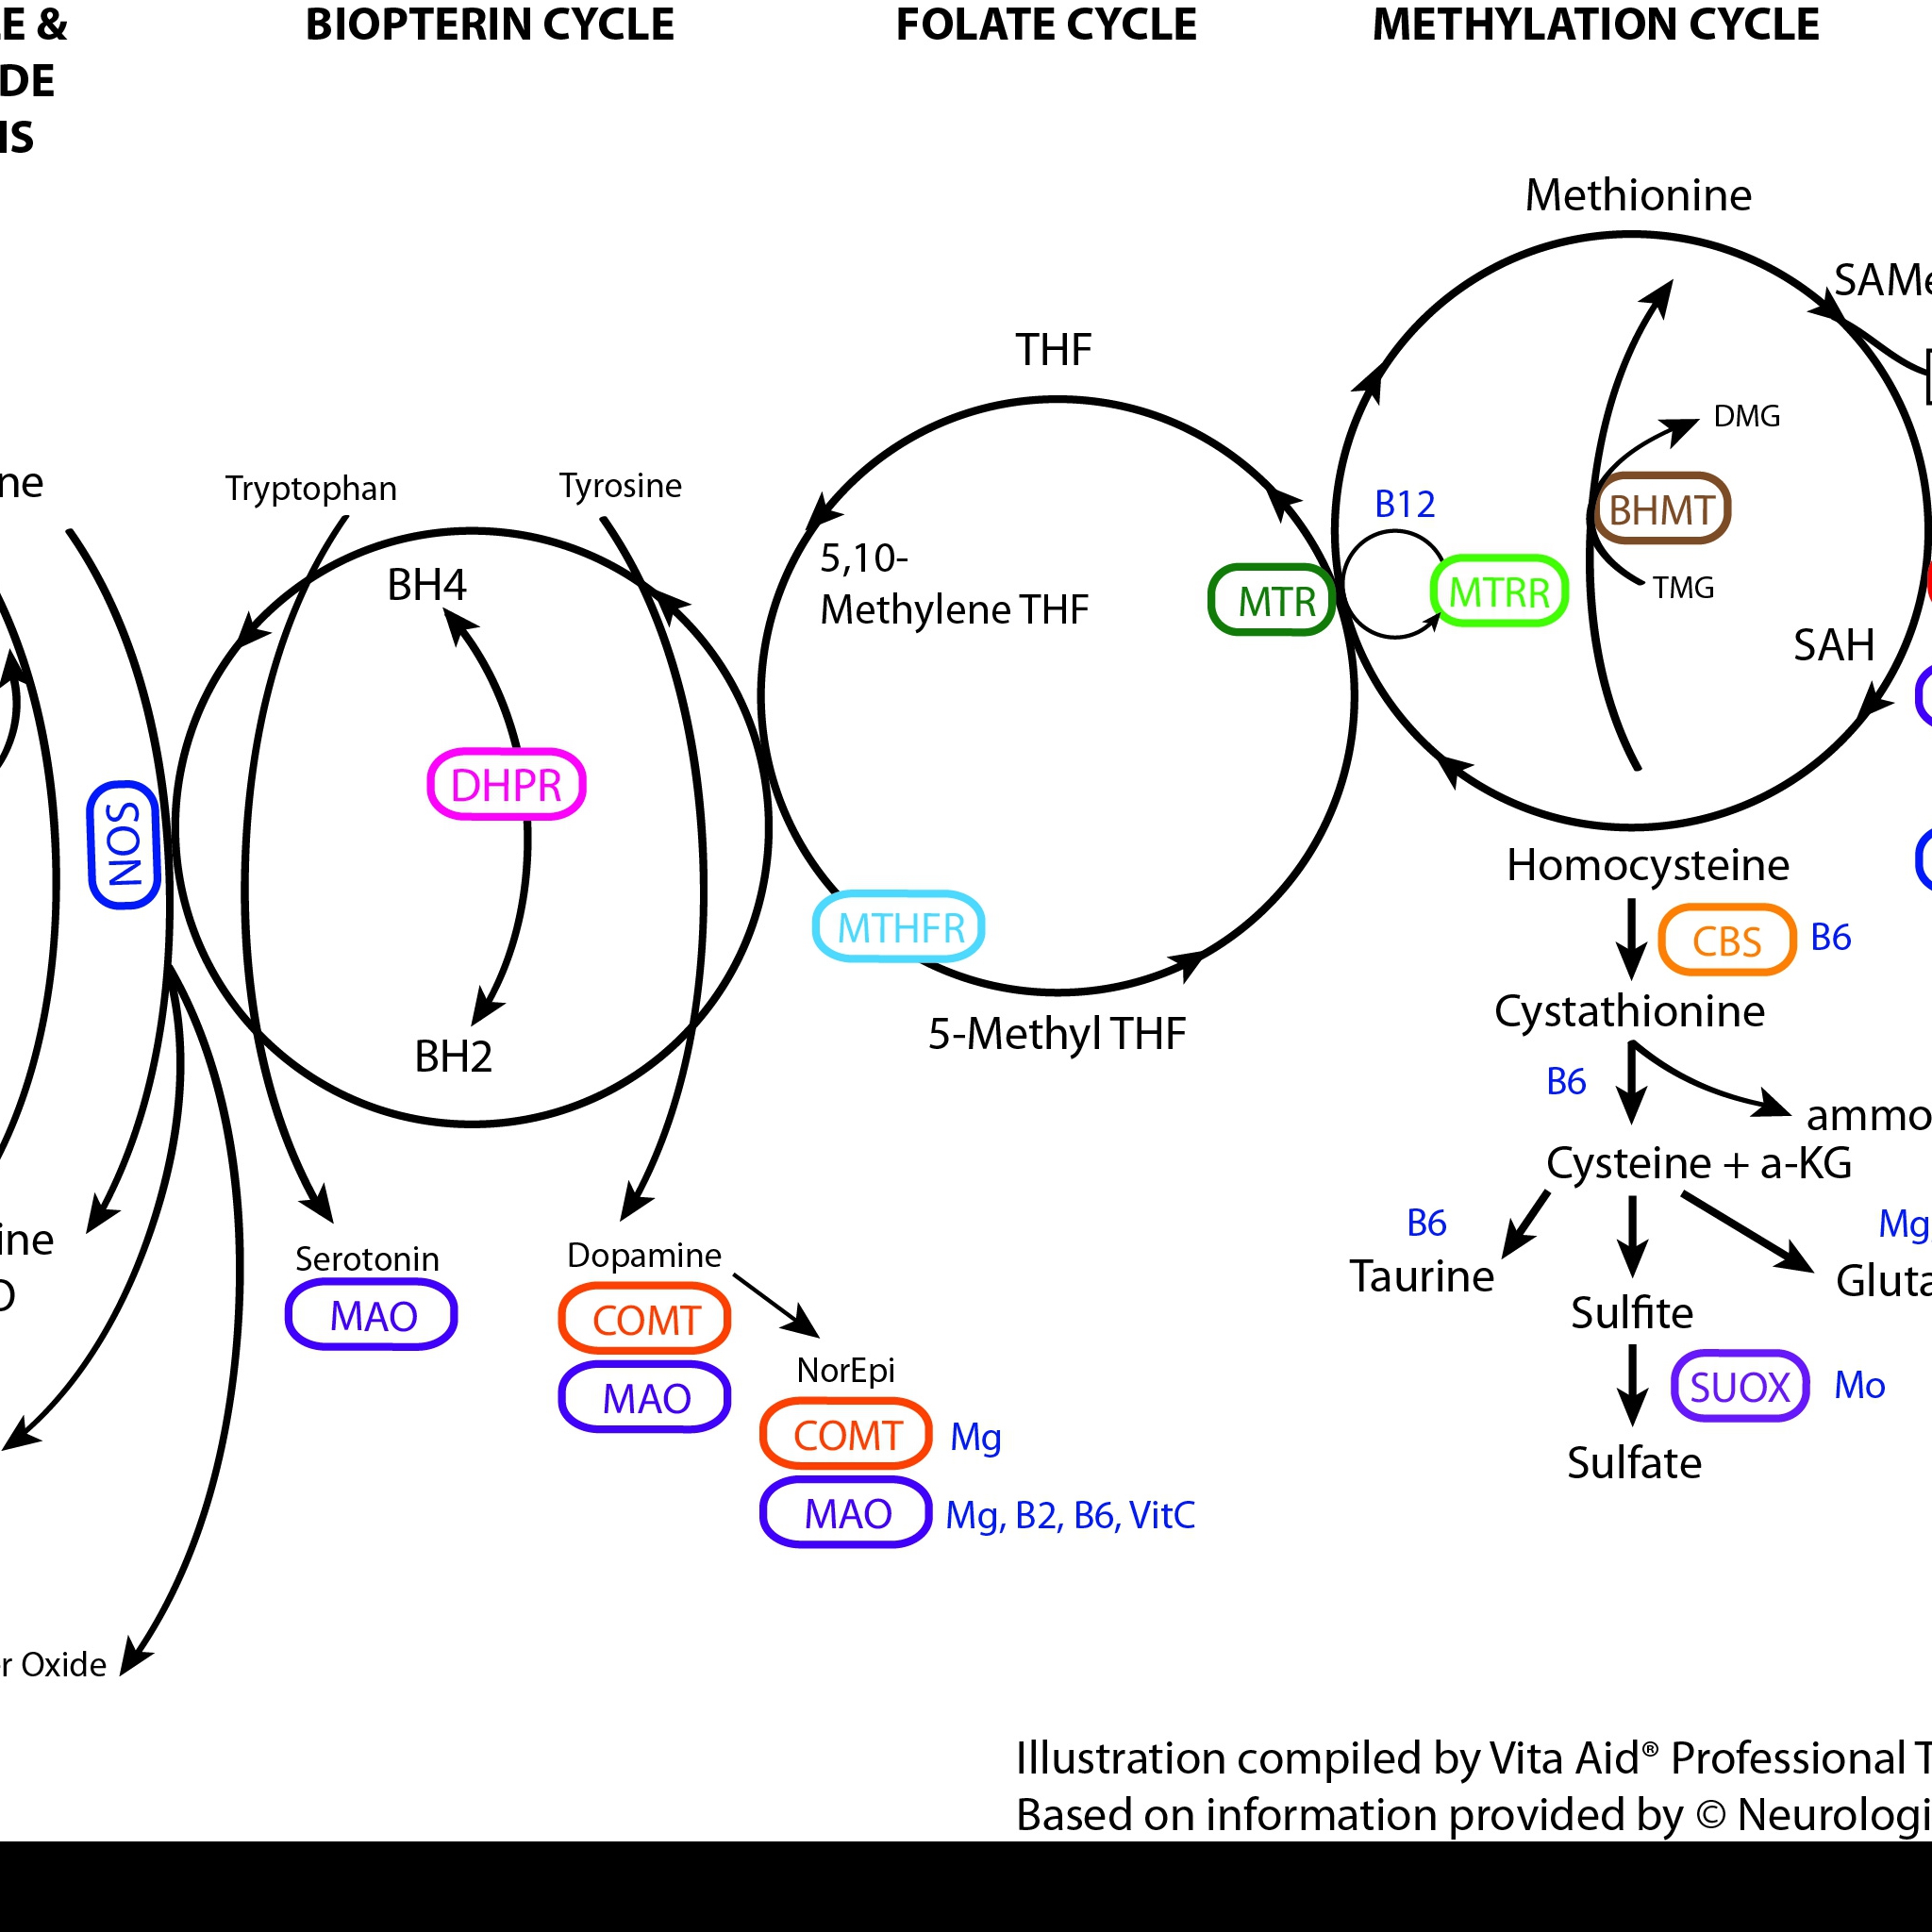 Methylation%20Cycle%20Collateral%20Pathways.jpg